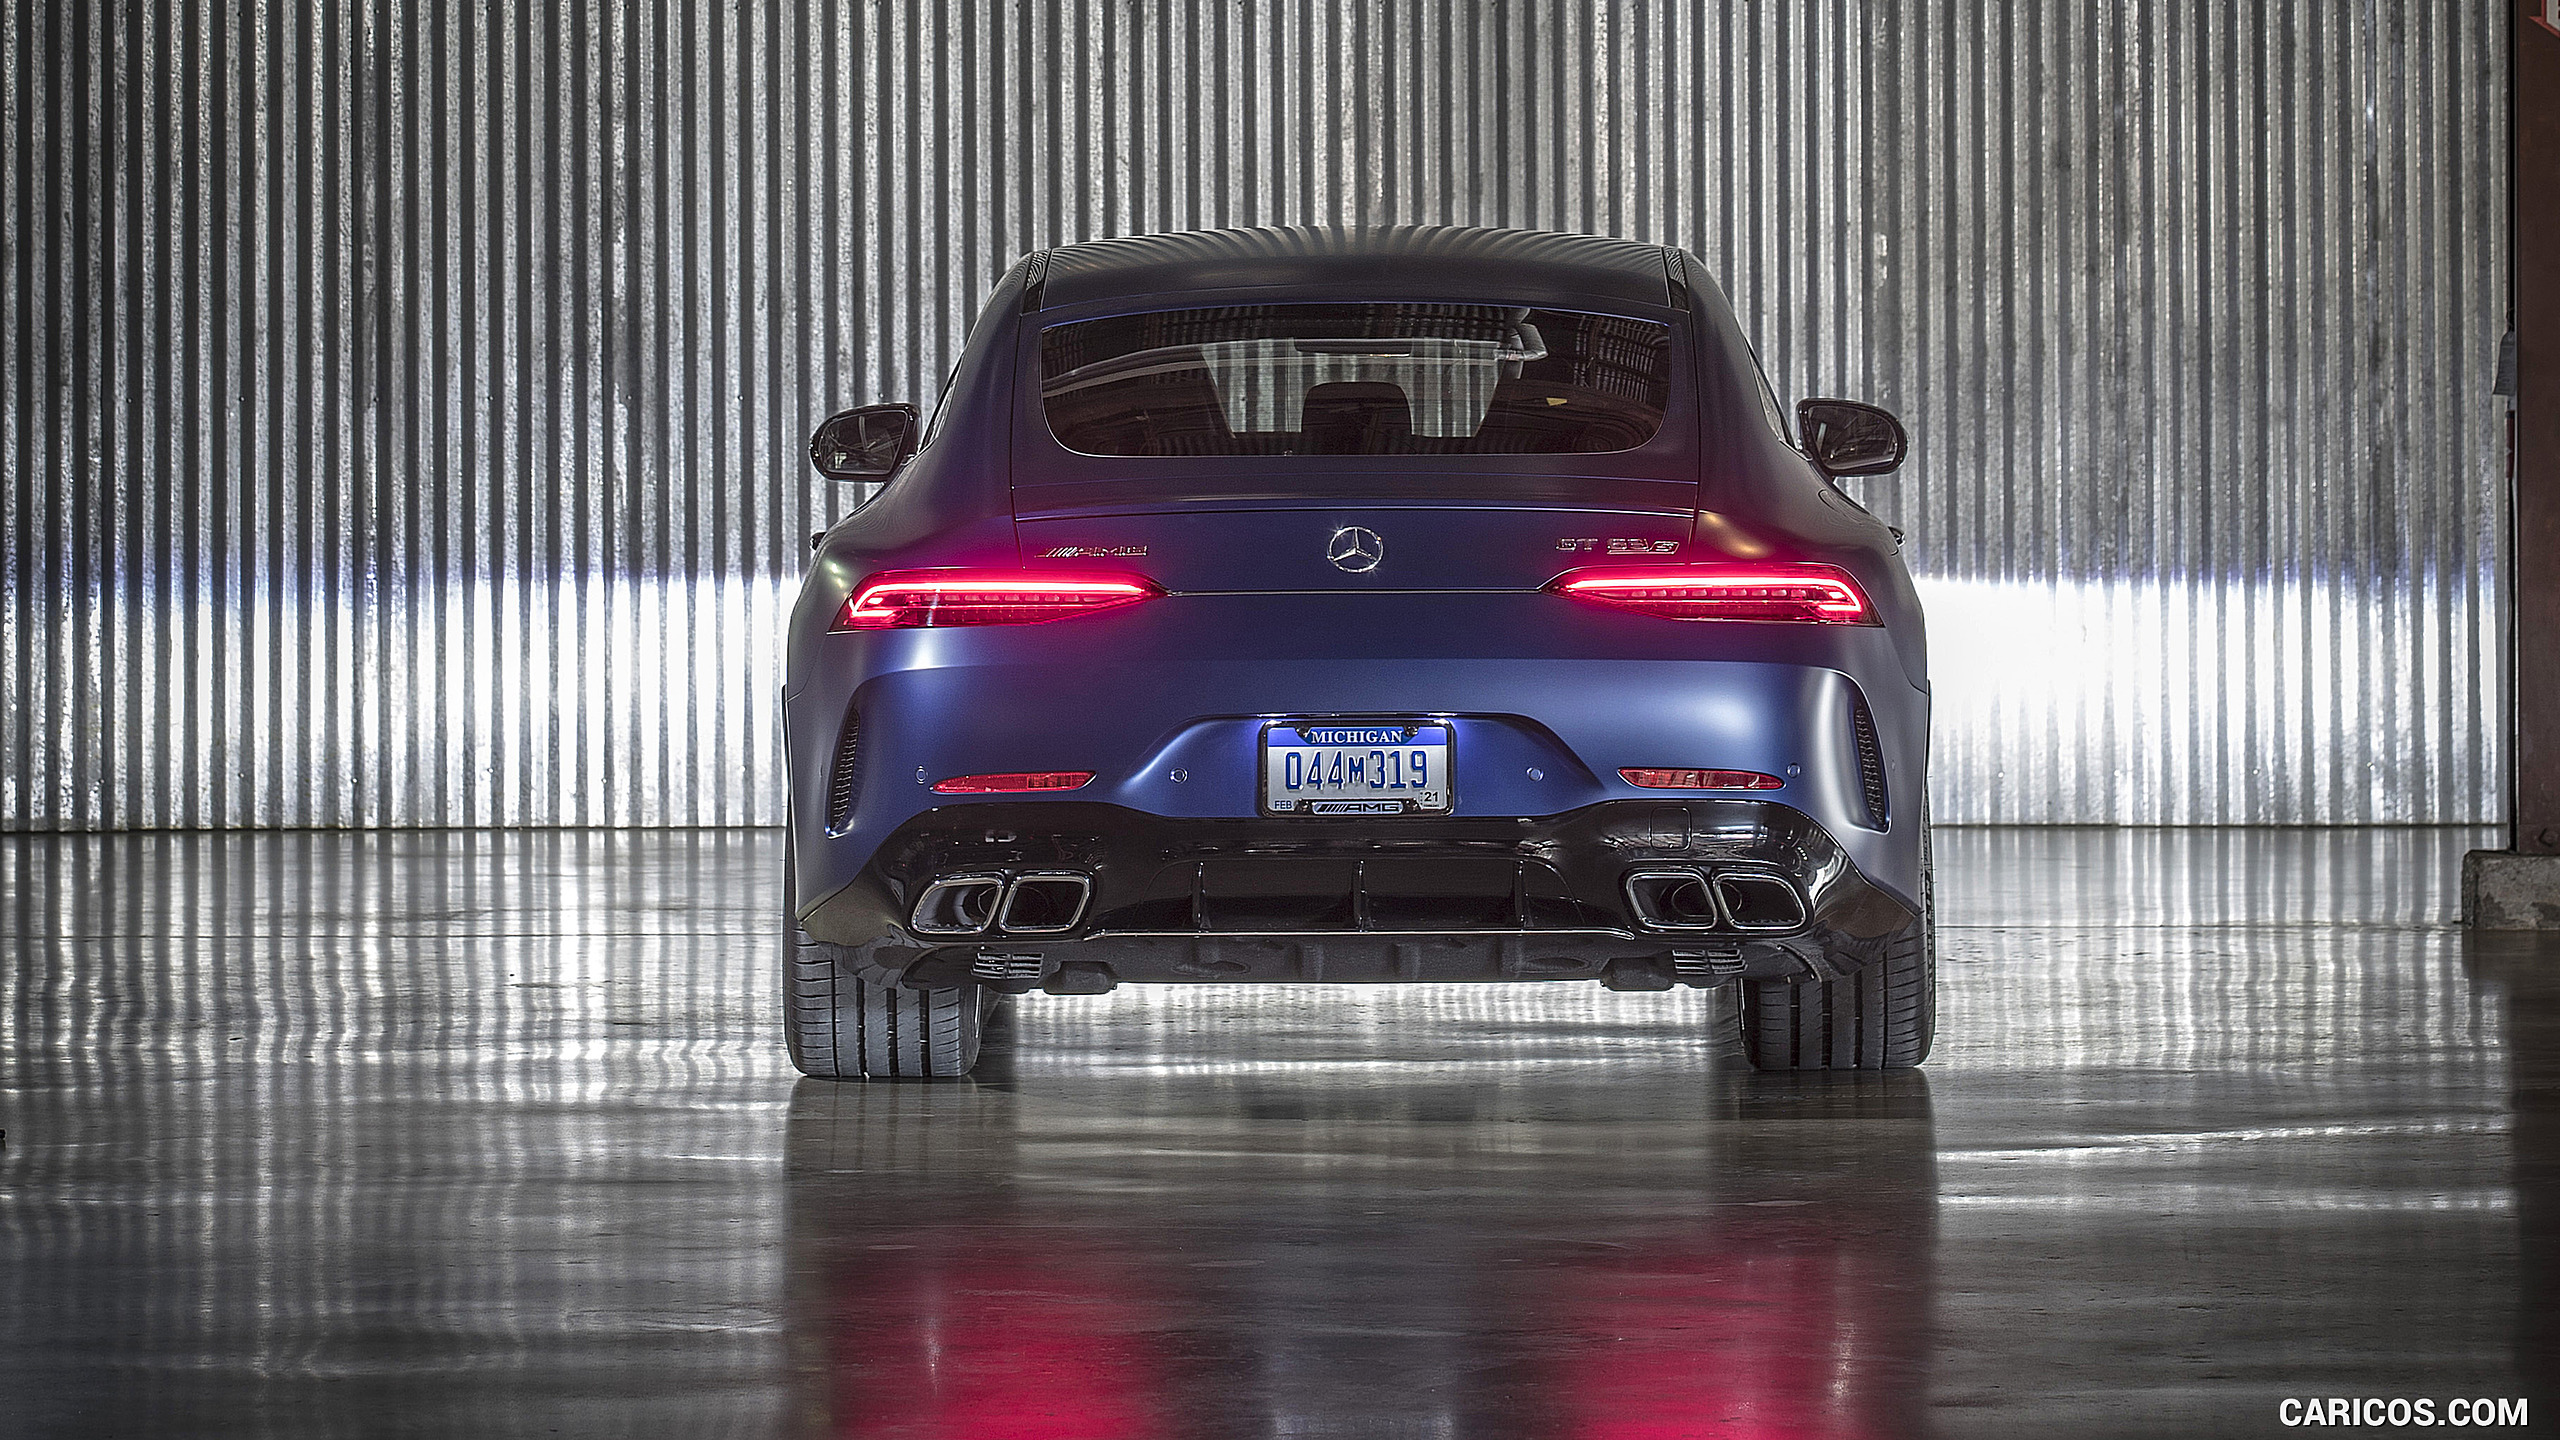 2019 Mercedes-AMG GT 63 S 4MATIC+ 4-Door Coupe - Rear, #139 of 427